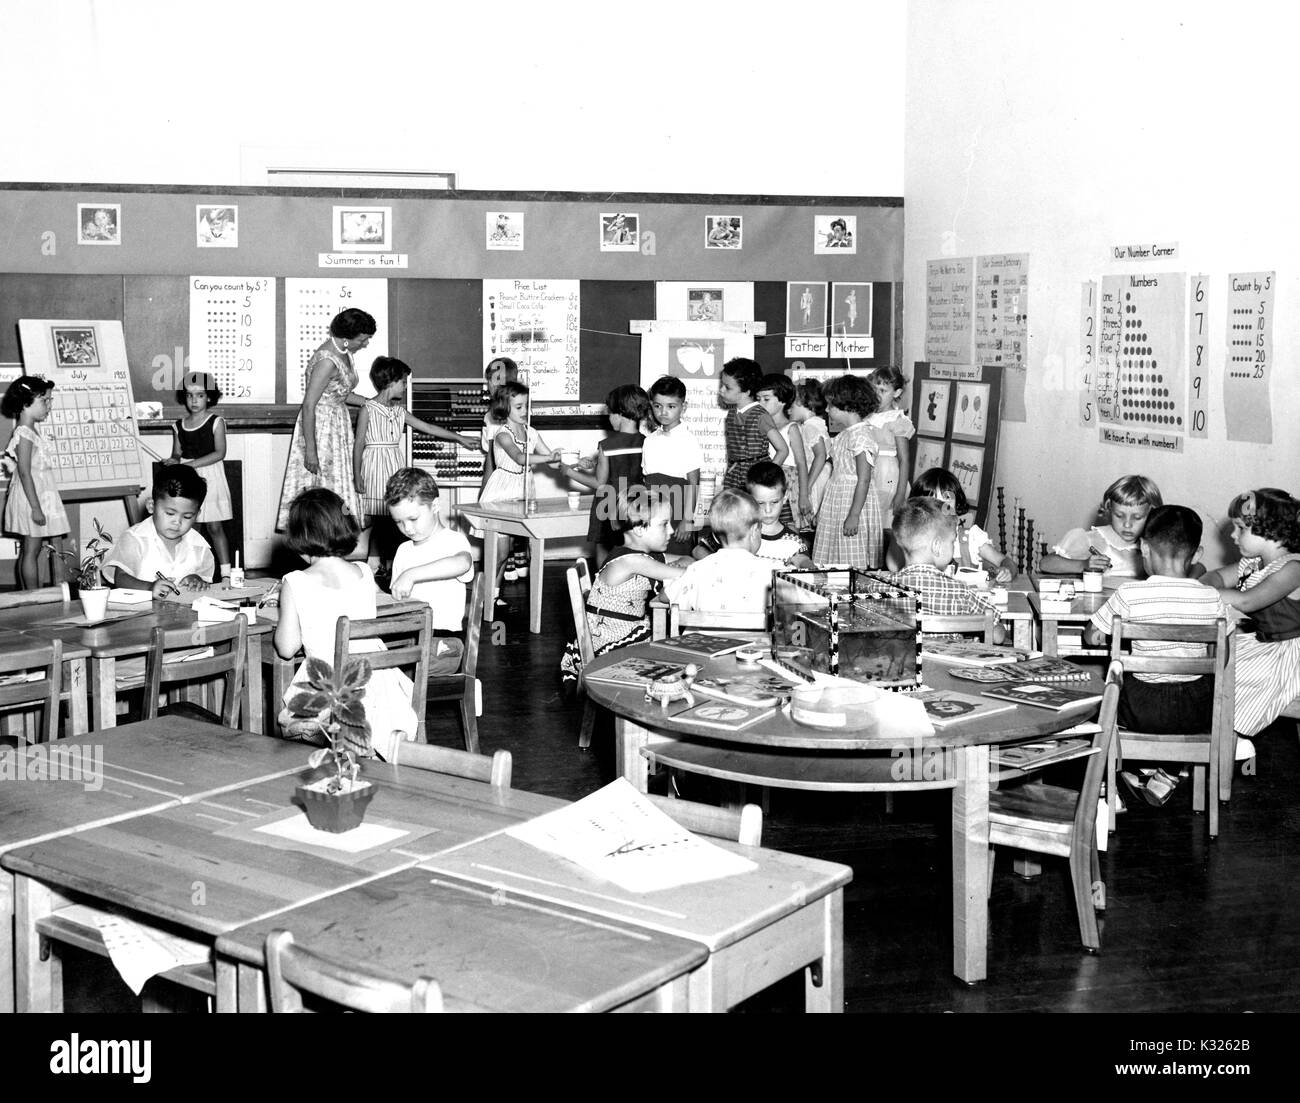 At an elementary demonstration school of Johns Hopkins University, students in Ms Ethel Brand Ford's first grade class sit at tables performing school work with crayons and workbooks, while two girls give a lesson with a calendar at the front of the room, beside Ms Ford who helps a line of students waiting to use the freestanding abacus for mathematics, Baltimore, Maryland, June, 1955. Stock Photo